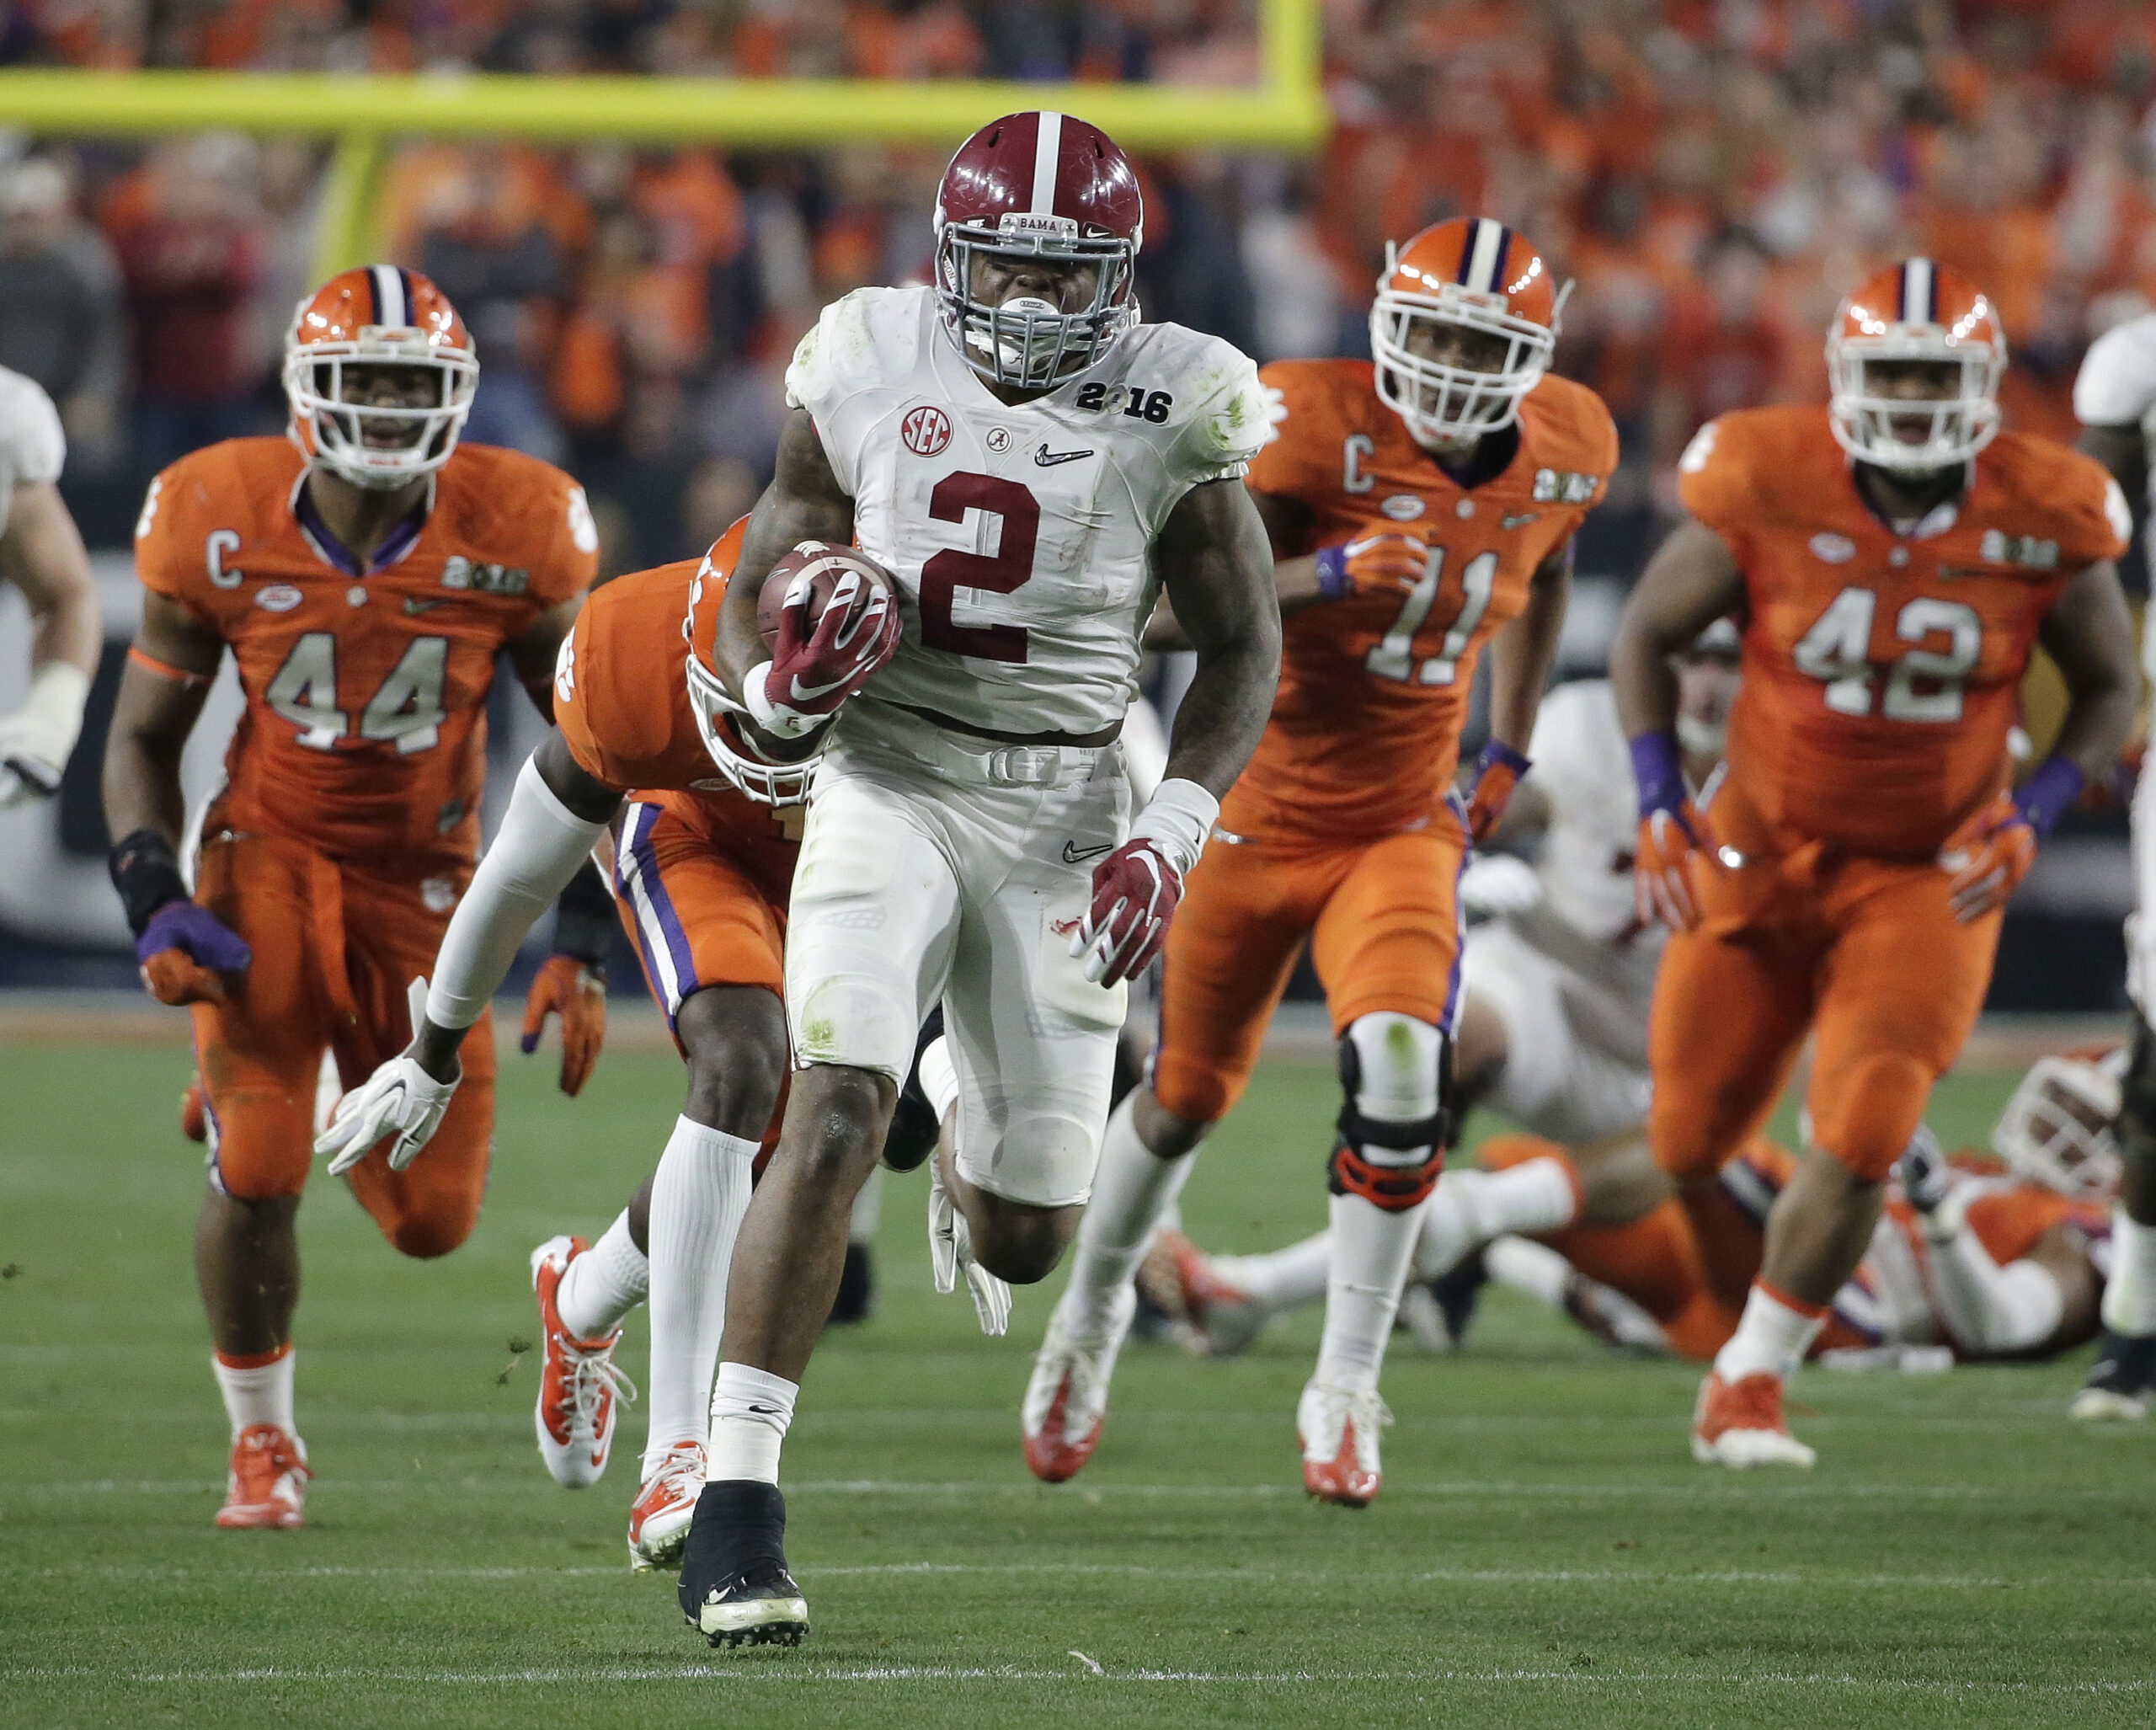 Alabama's Derrick Henry runs for a touchdown in the NCAA college football championship game in Glendale, Ariz. on Jan. 11, 2016, in which Alabama defeated Clemson to become the most recent national champion. (AP Photo/Chris Carlson) 